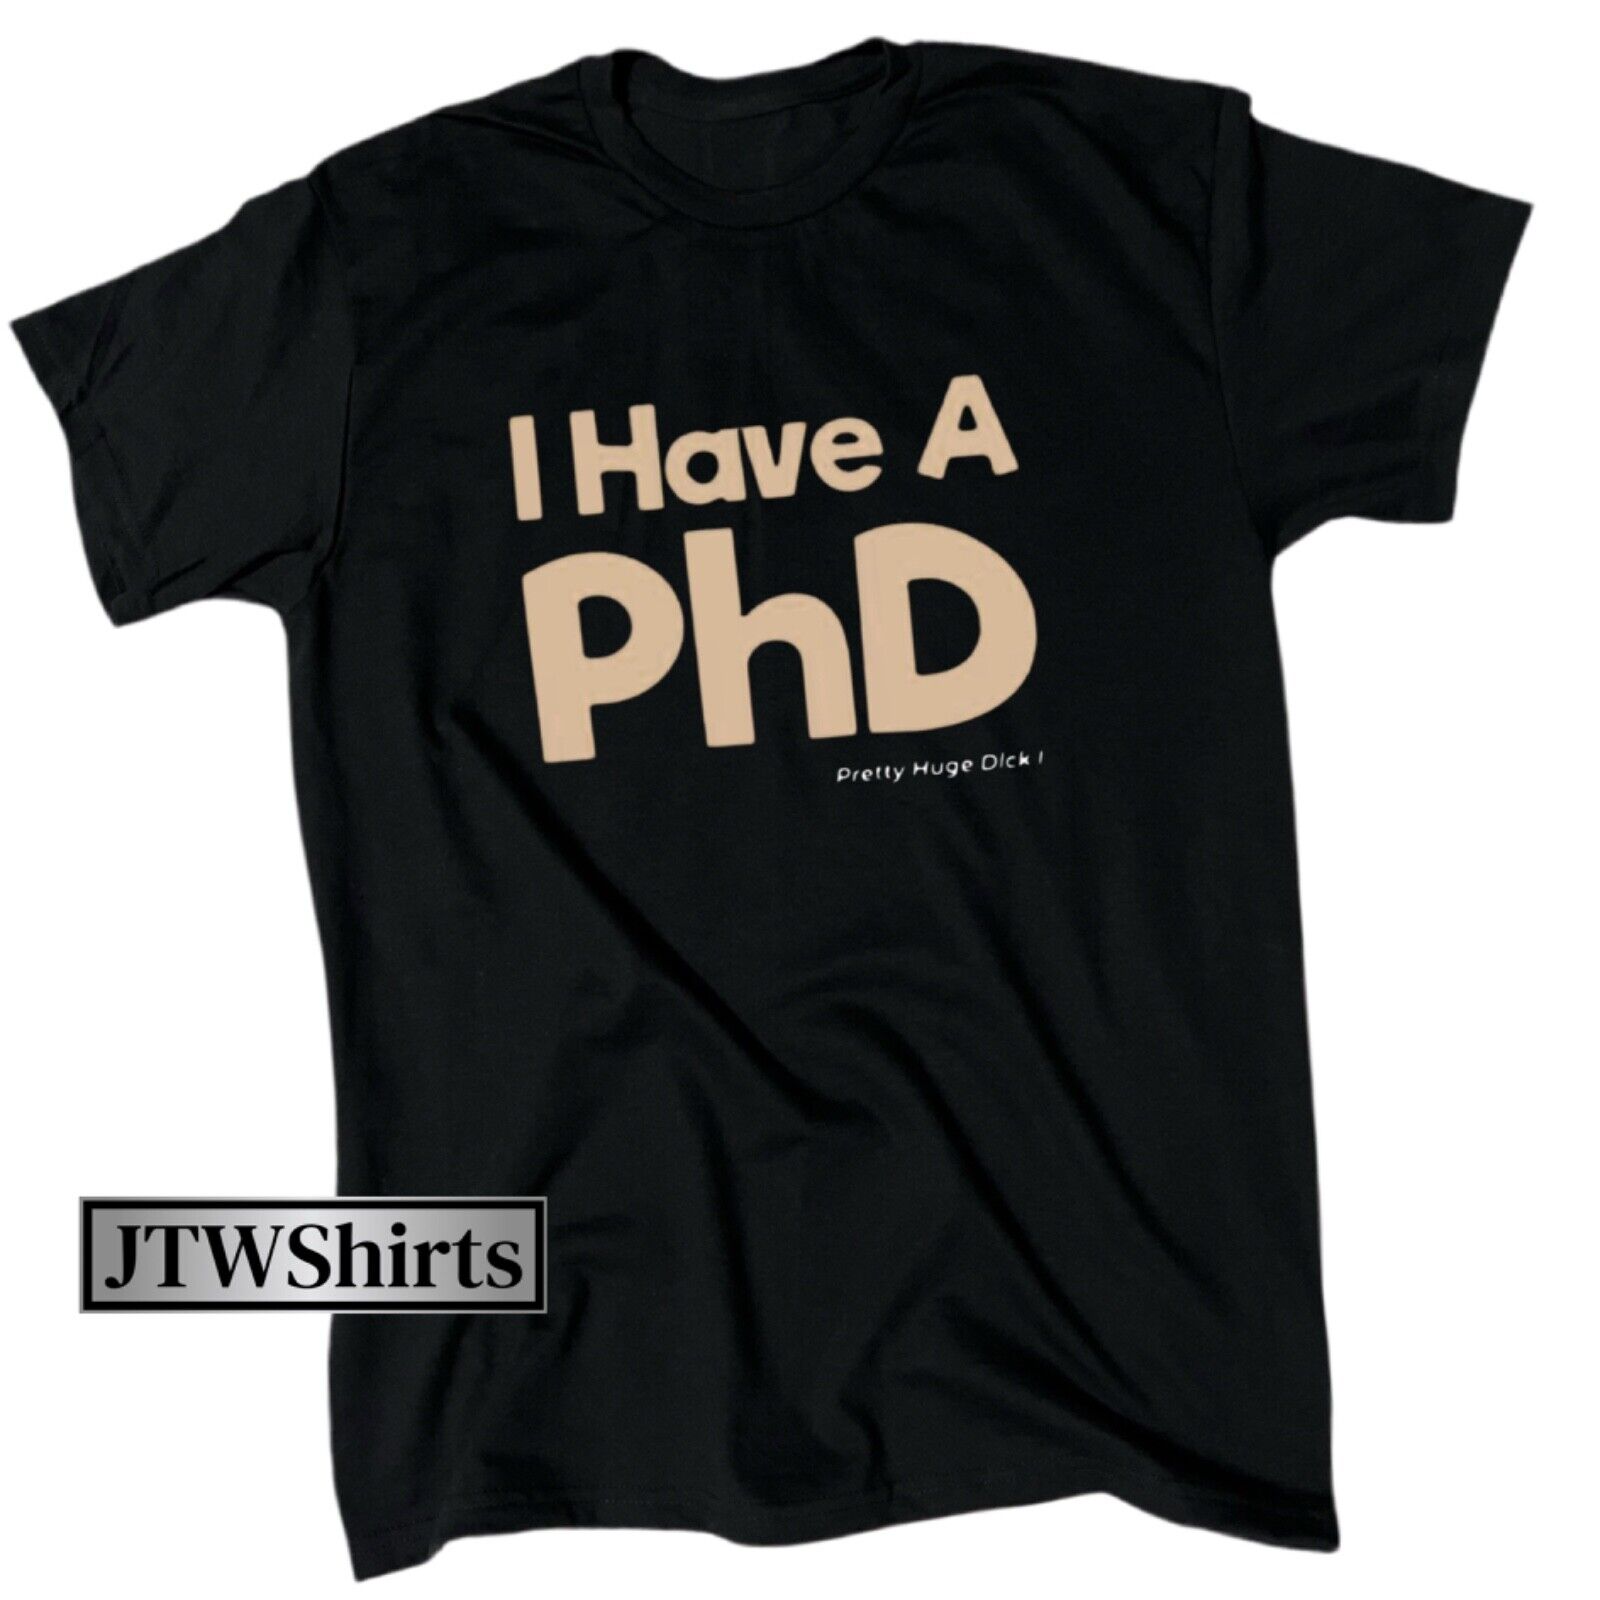 I Have A PhD Men’s Funny T-Shirt - Cotton - Gift - Crew - Offensive